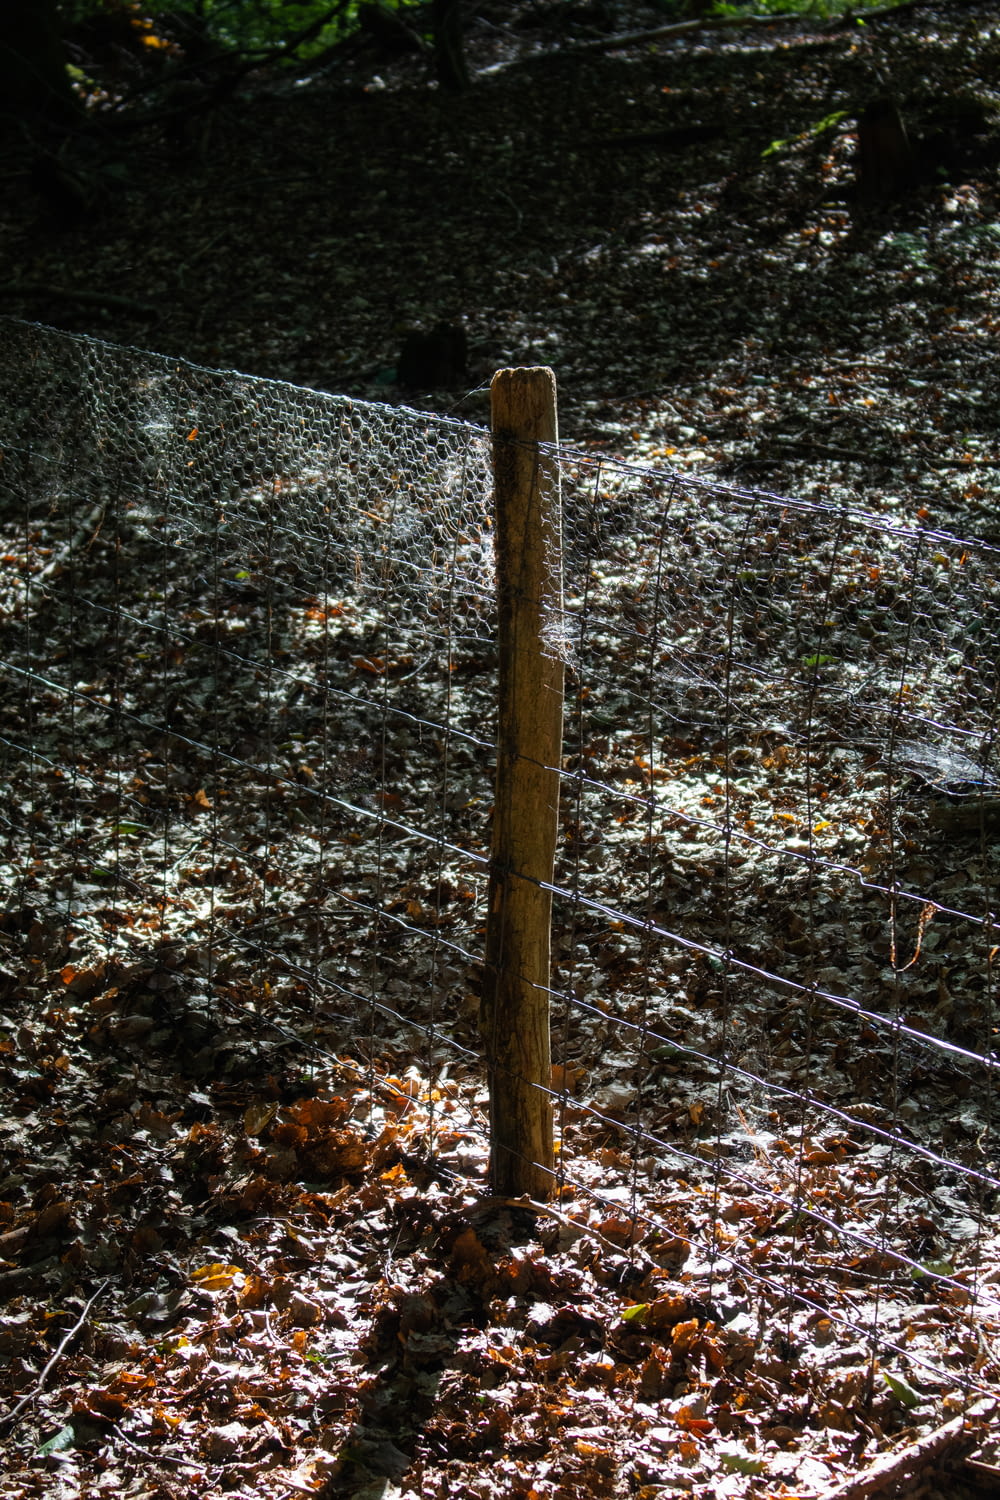 a fence in the middle of a field with leaves on the ground